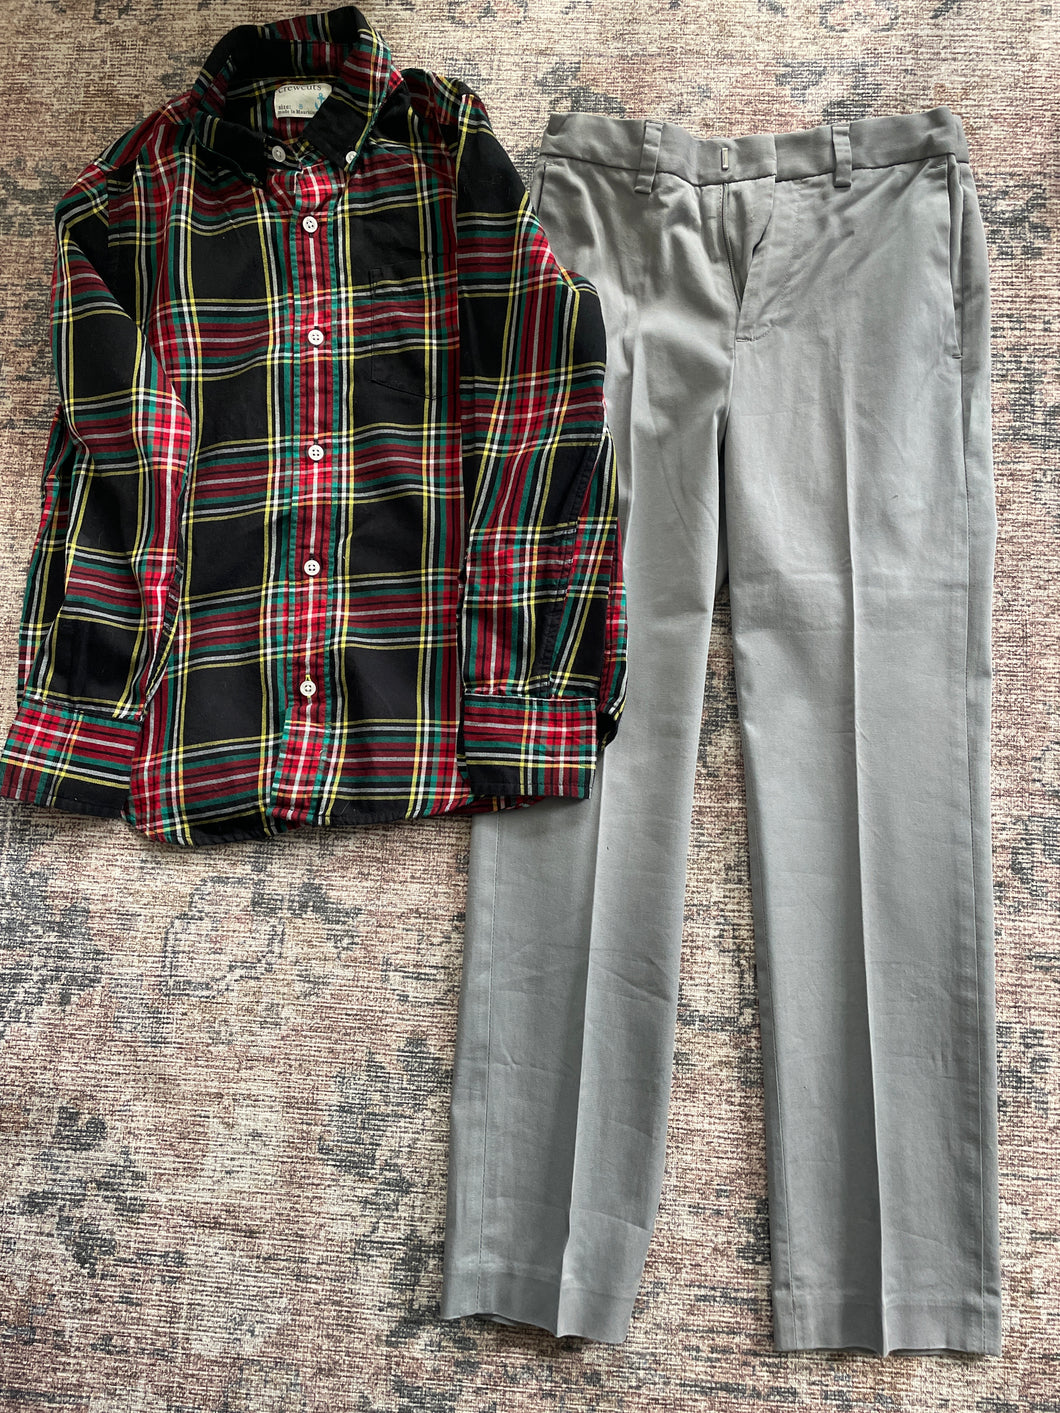 J Crew Cuts plaid button down (8) and J Crew Cuts and grey suit trousers (8) 8